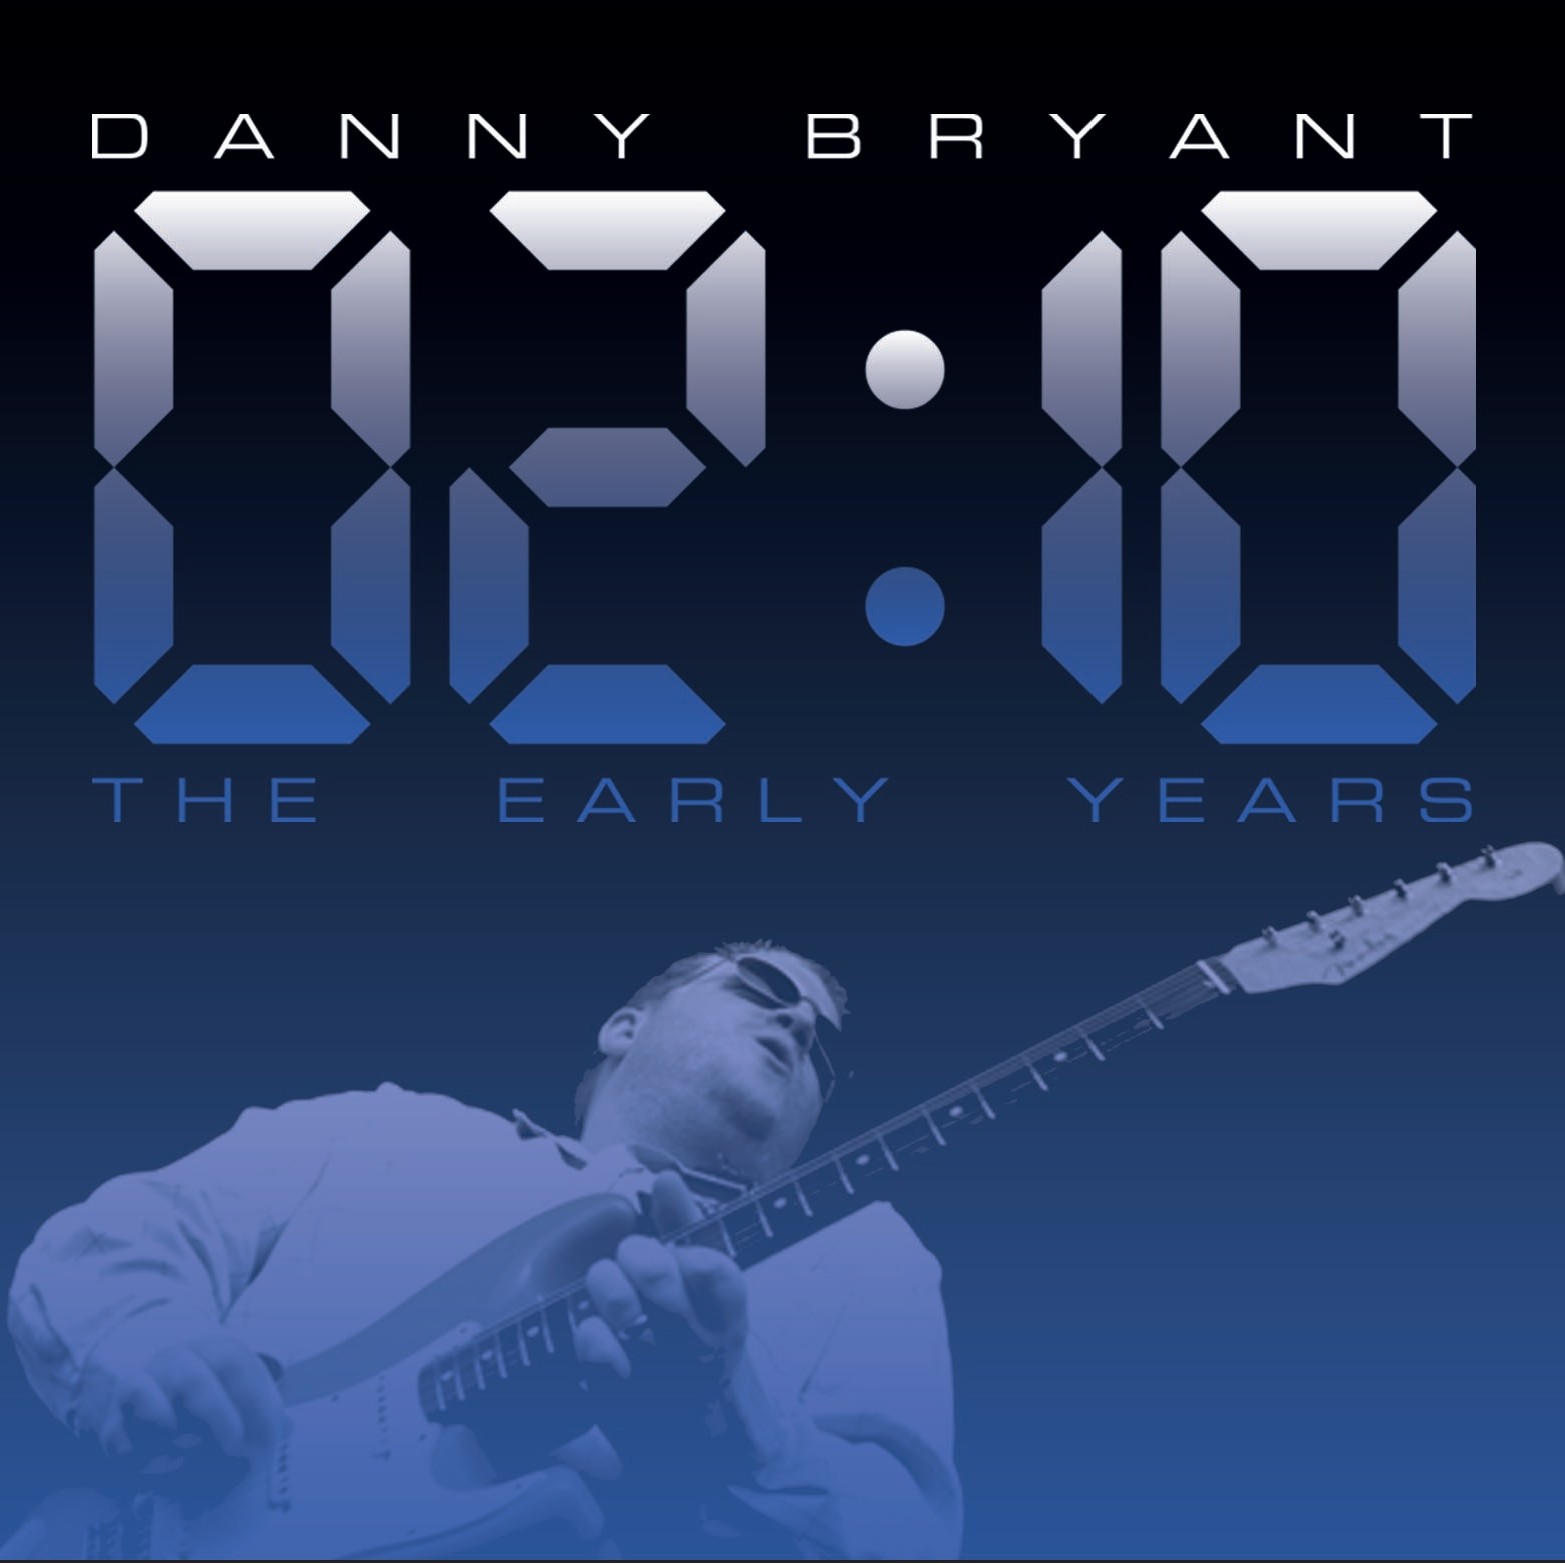 Danny Bryant - 02:10 - The Early Years